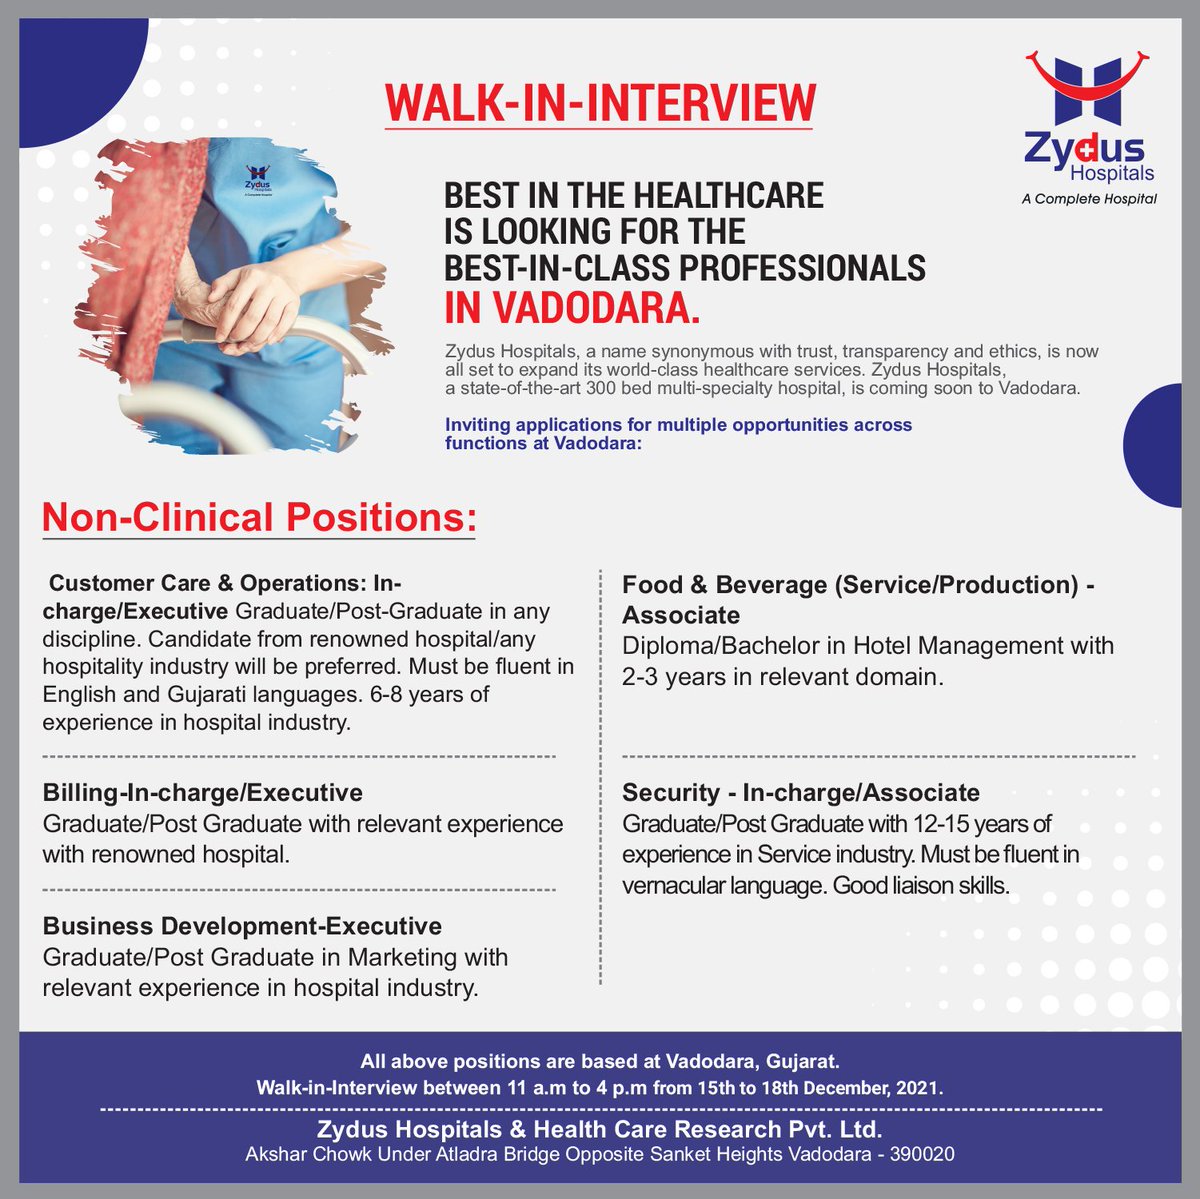 We are inviting applications for multiple opportunities across functions at Vadodara. Get associated with the best and explore your opportunities to shine bright.

#Baroda #Vadodara #BanyanCity #CareerOpportunity #NonClinicalProfessional #WalkInInterview  #ZydusHospitals #Gujarat https://t.co/LZrF6lwc6c